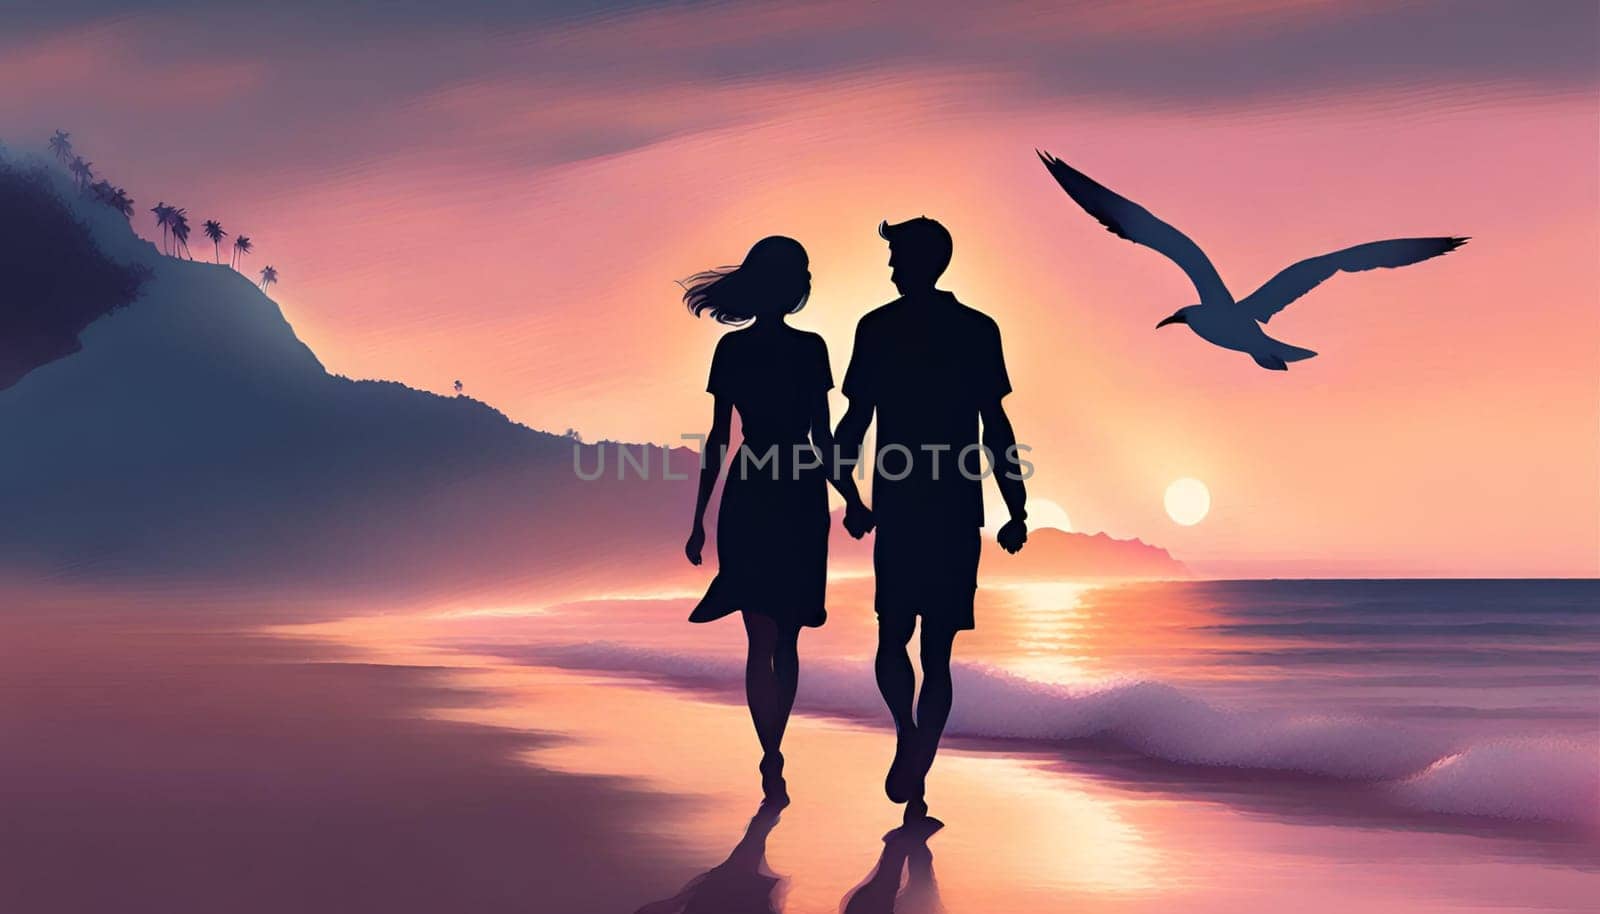 A couple holding hands and walking on a beach at sunset. The sky is orange and pink, and the ocean is calm. There are some seagulls flying in the distance. Happy Valentine's Day c